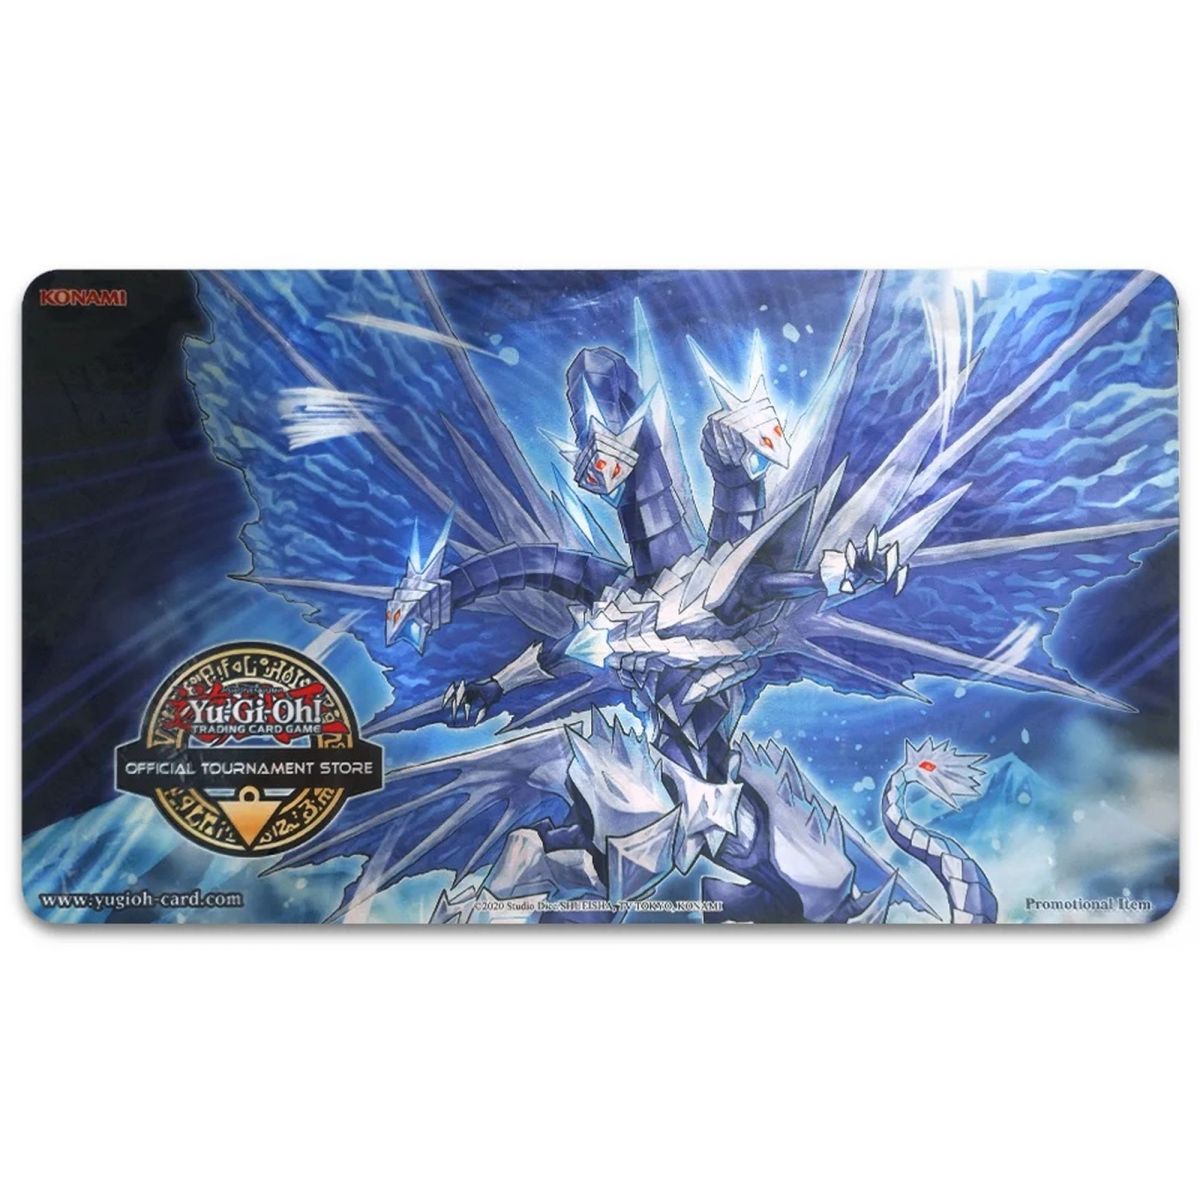 Item Yu-Gi-Oh! - Playmat - Back to Duel "Trishula, the Ice Dragon of Icy Imprisonment"